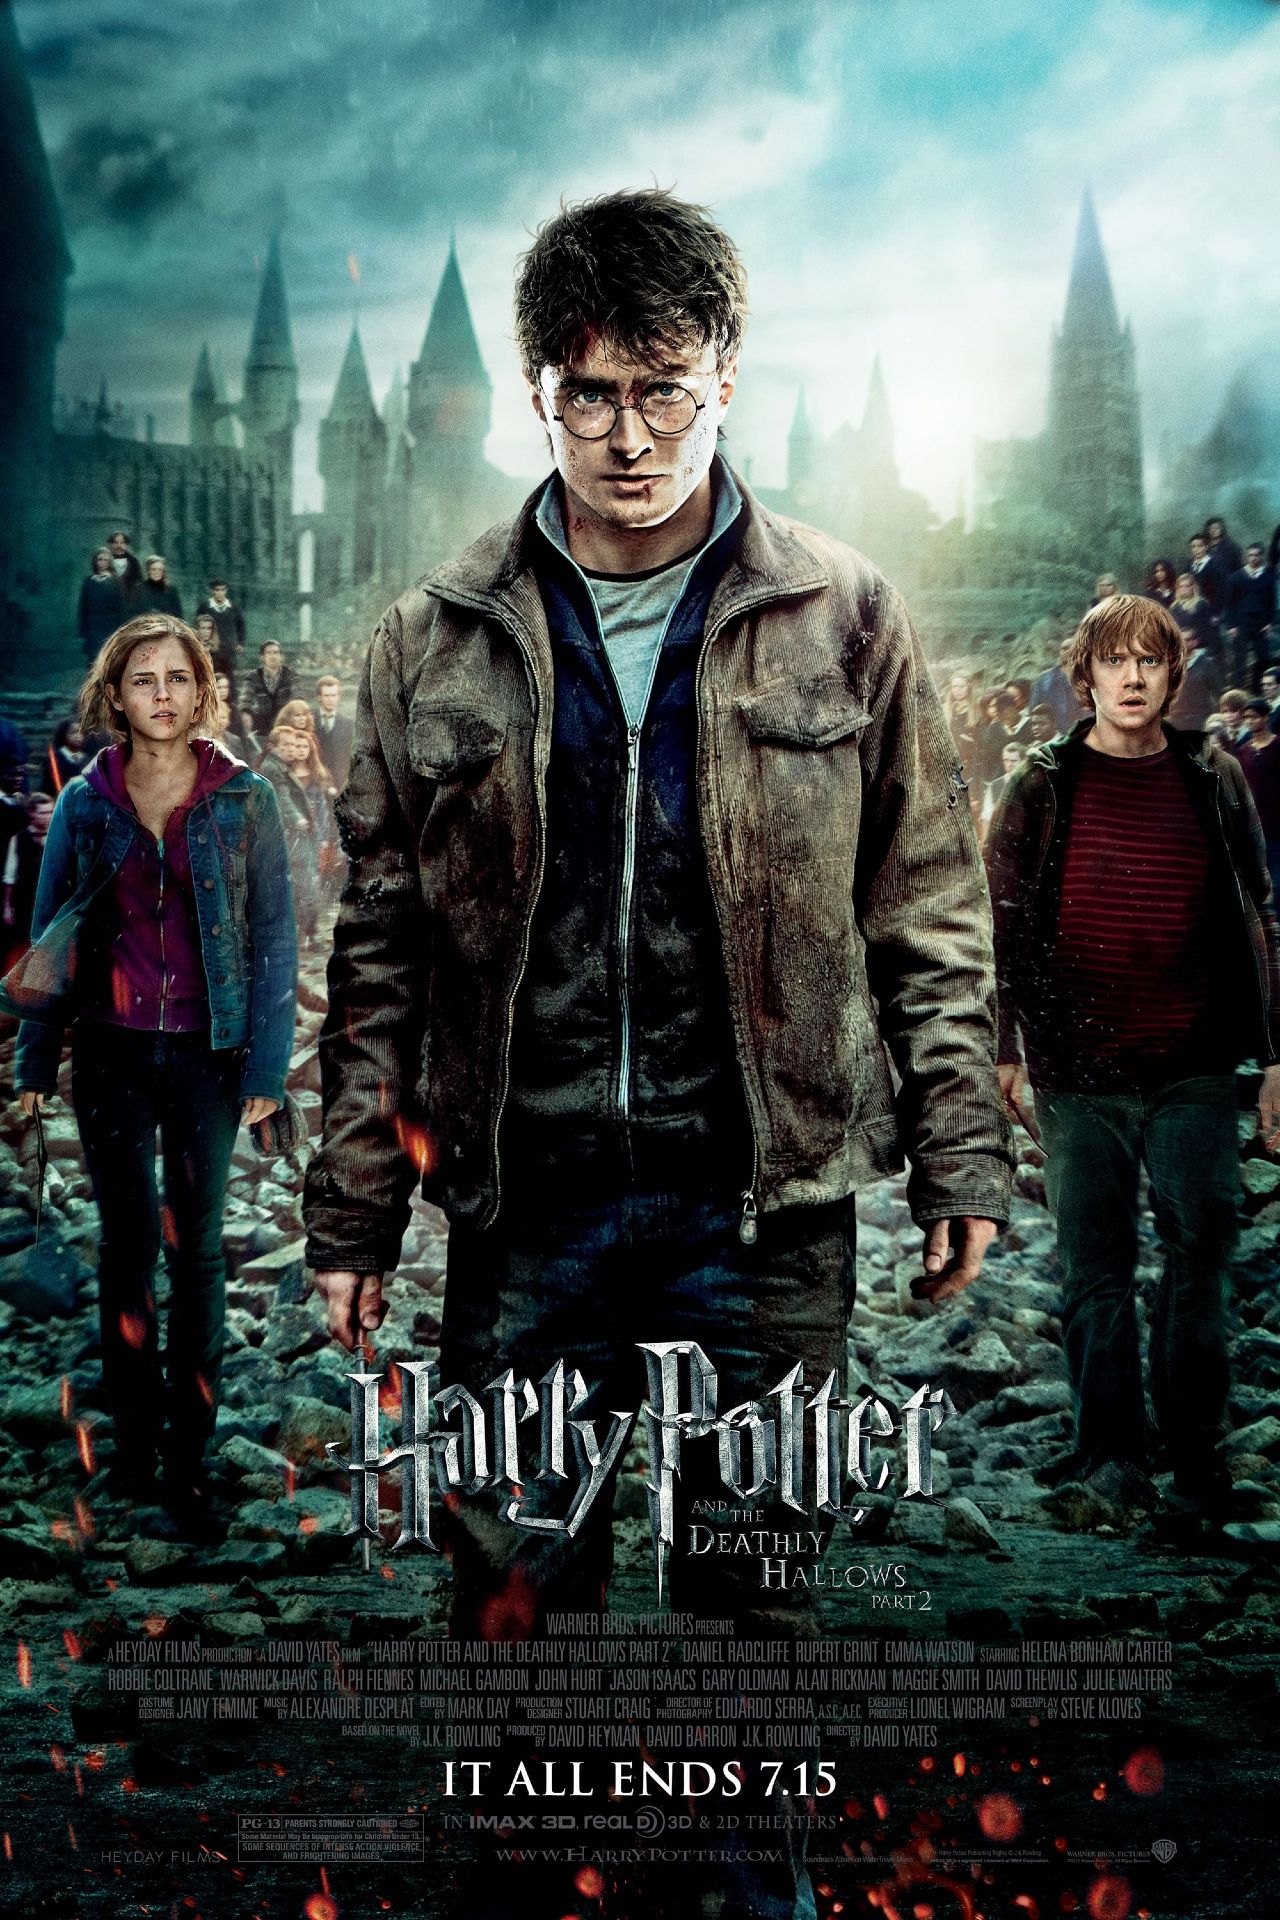 Harry Potter and the Deathly Hallows - Part 2 Movie Poster